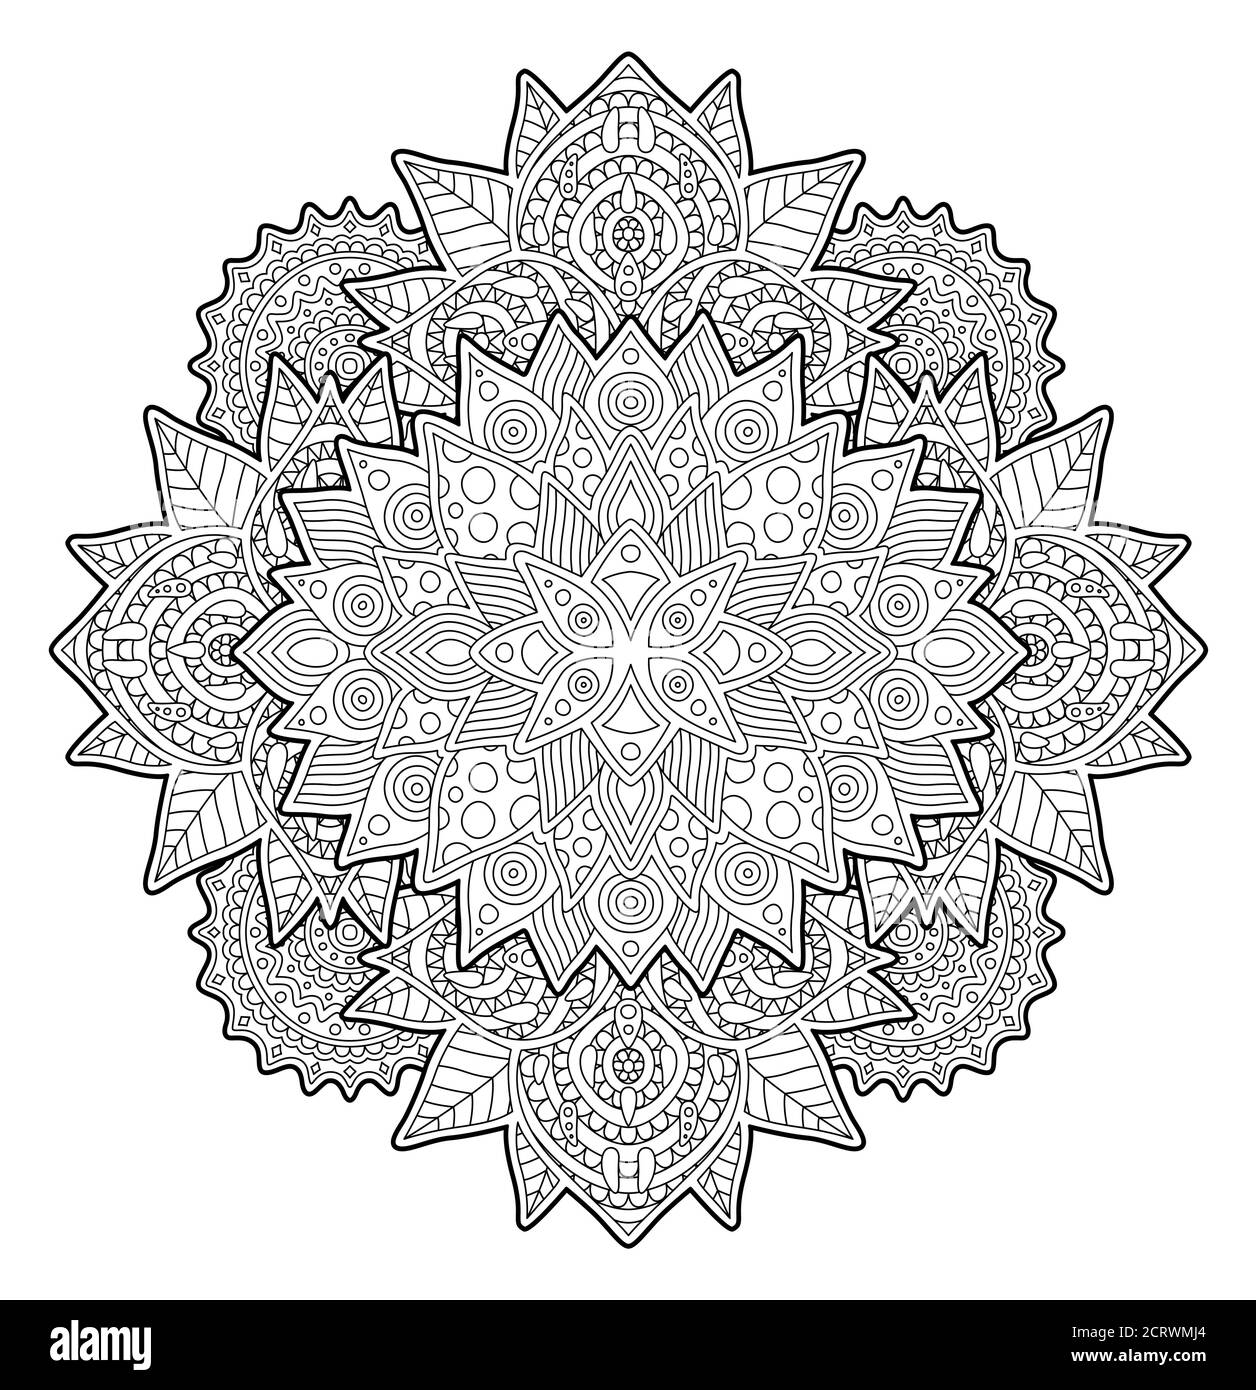 Beautiful adult coloring book page with abstract pattern on white background Stock Vector